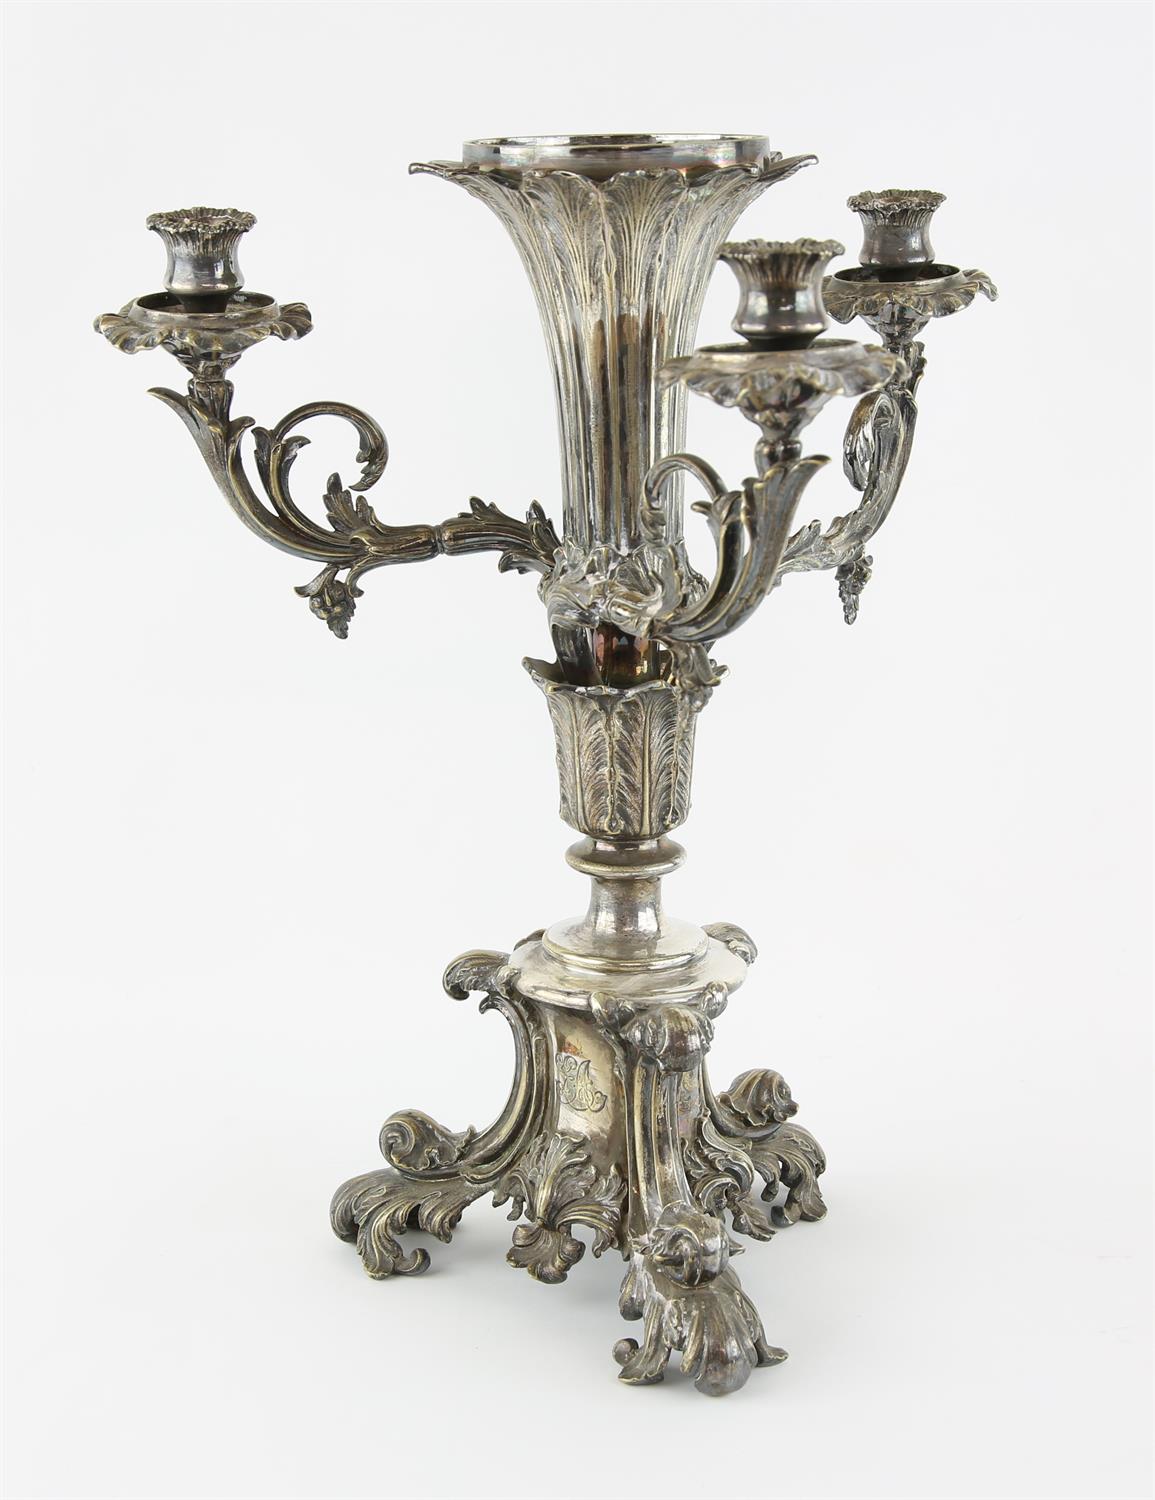 Silver plated three light centre piece with scroll arms and feet, with motto 'Vincit Qui Pattur',